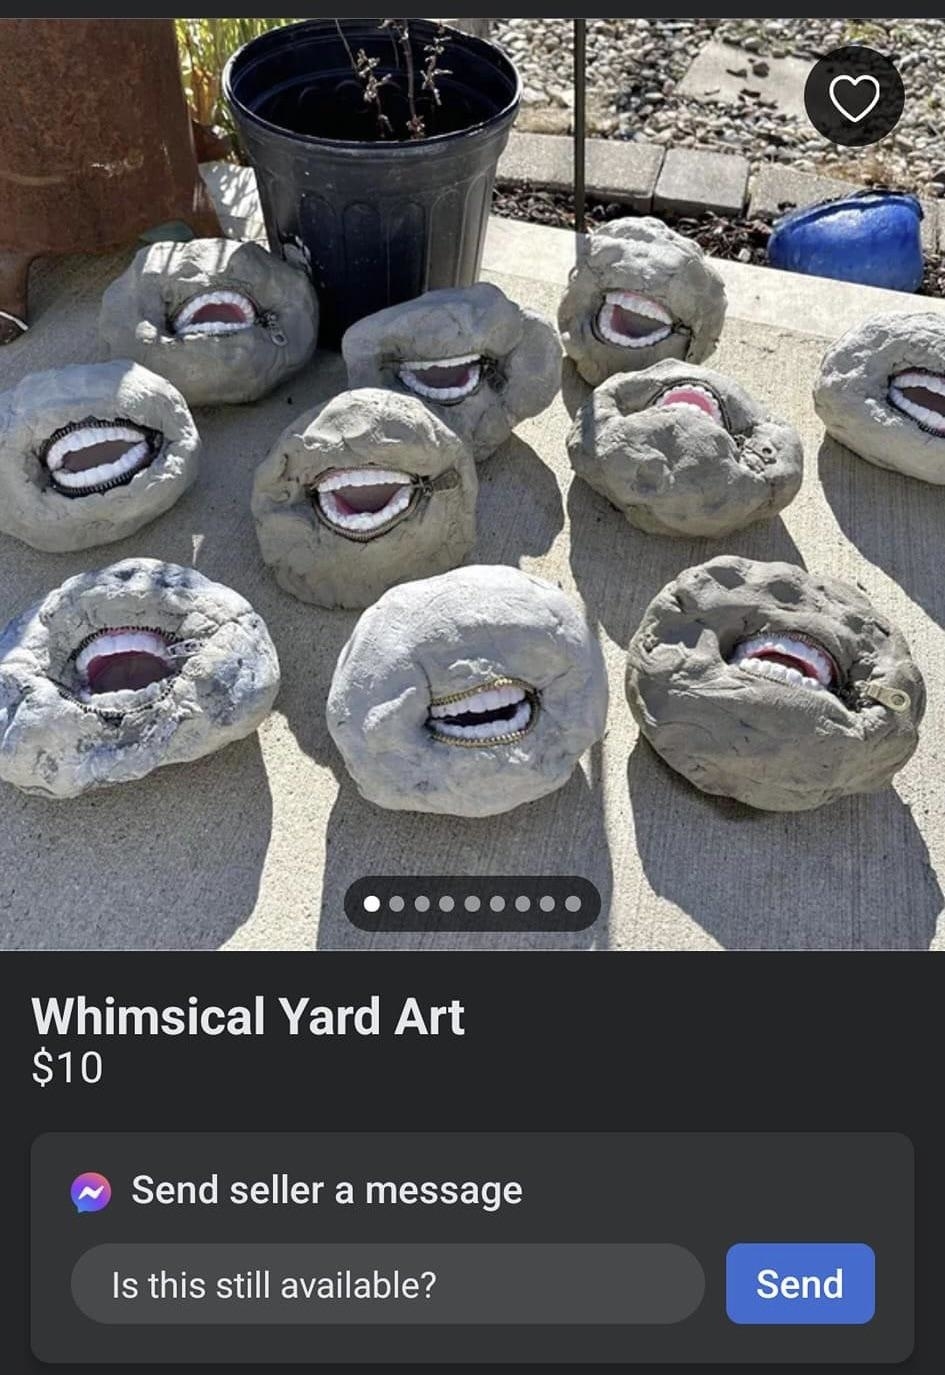 Whimsical rock art resembling mouths with teeth for sale, grouped on concrete, with a plant pot behind